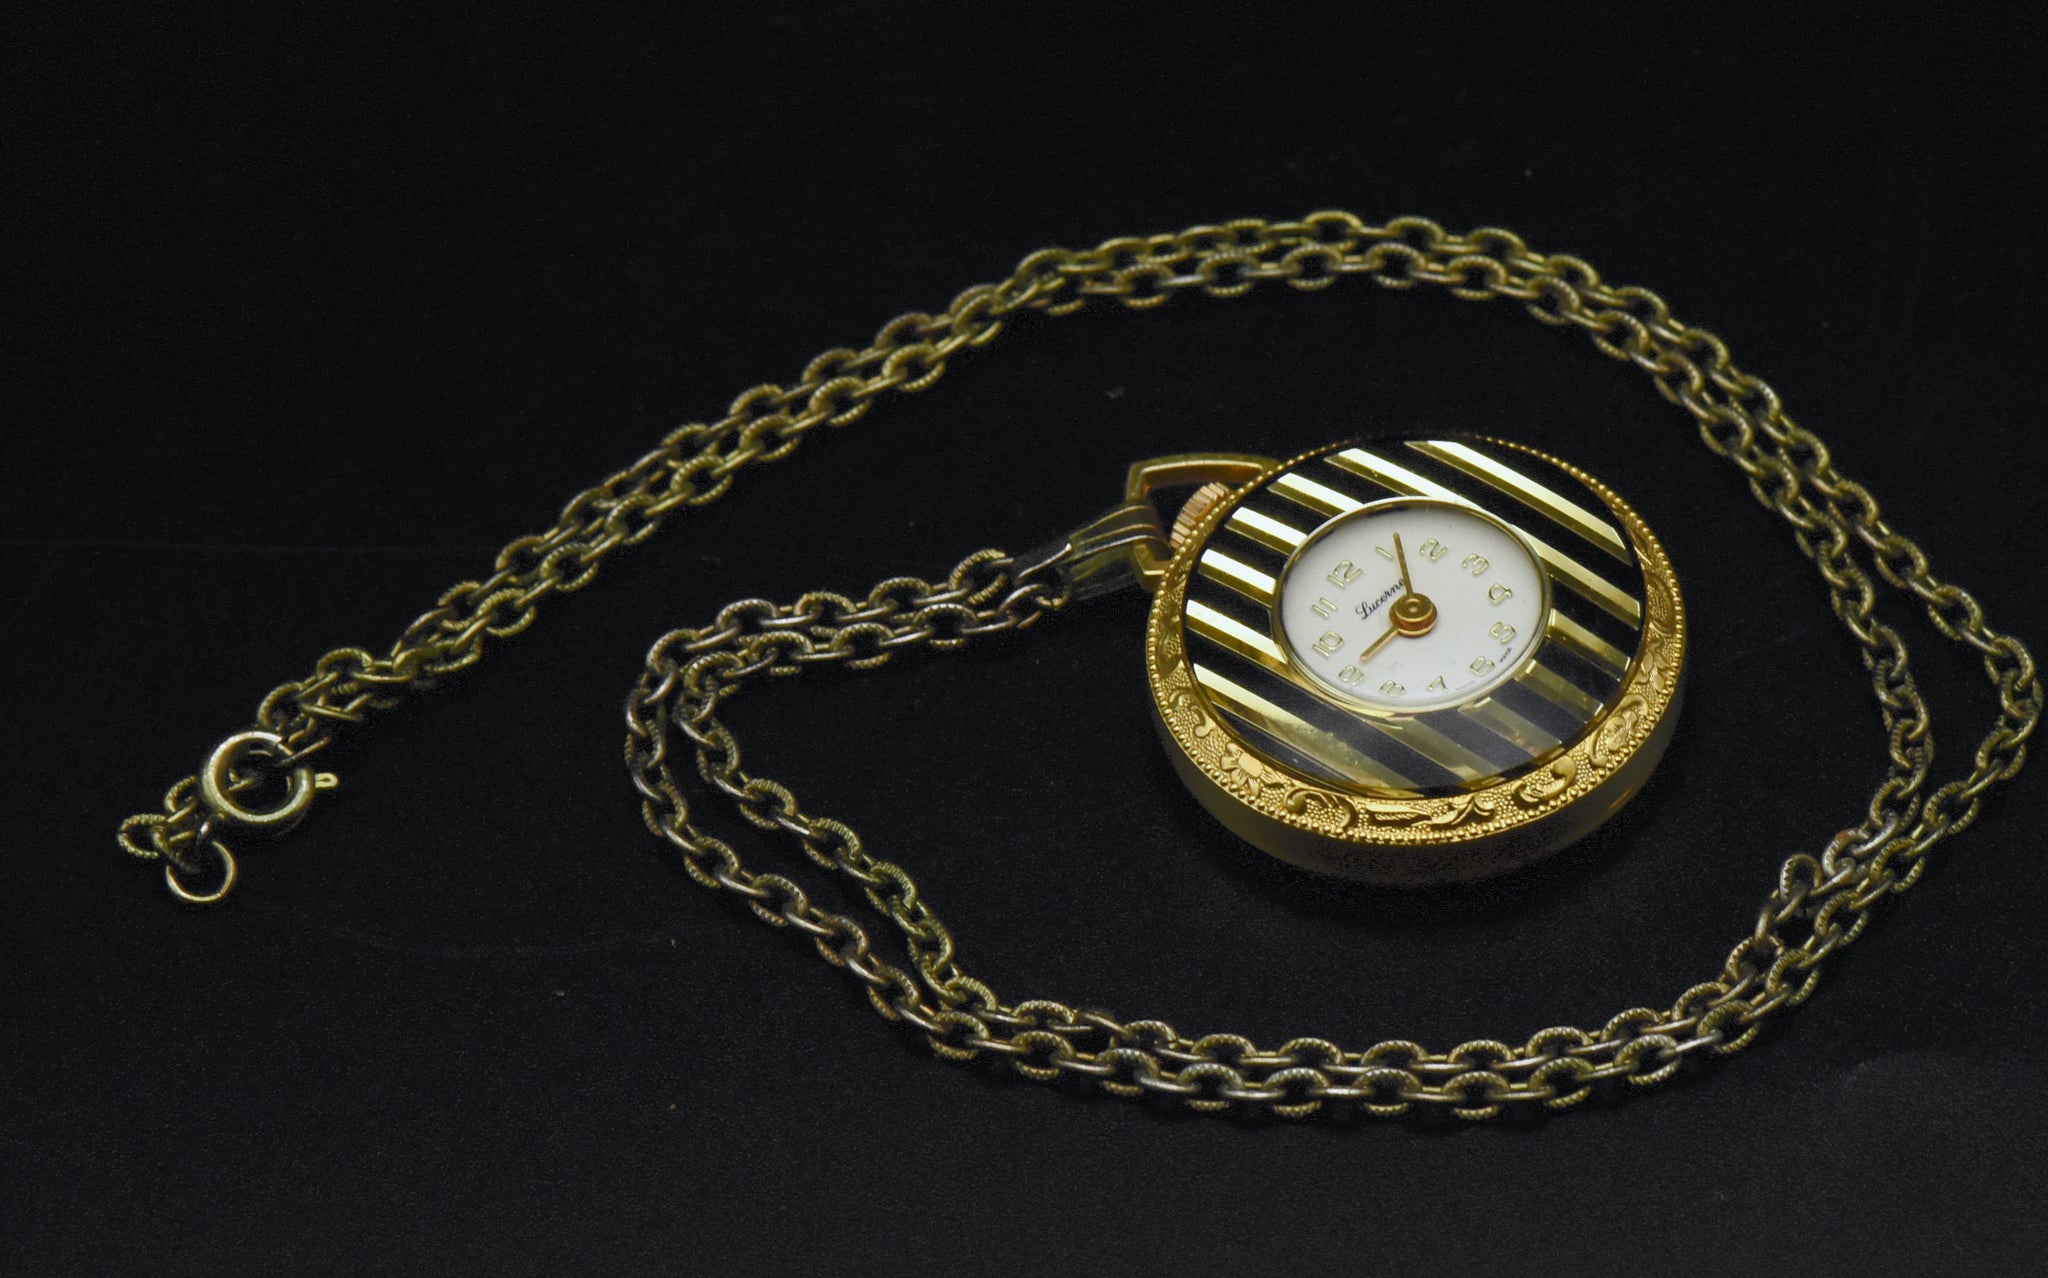 Buy Gold Saxony Watch Pendant Vintage Necklace Online in India - Etsy